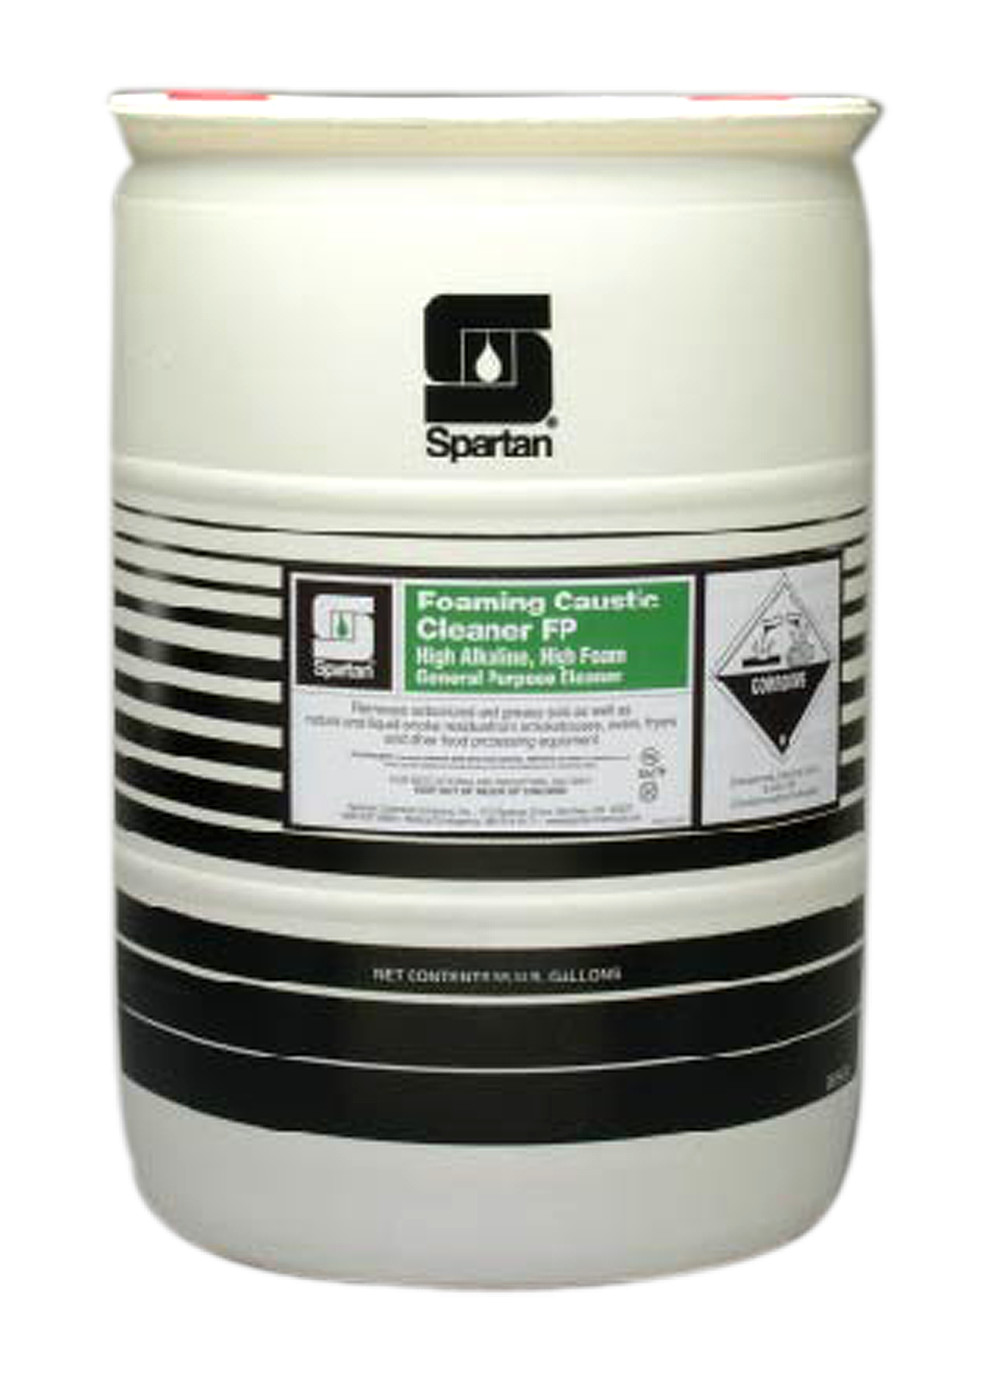 Spartan Chemical Company Foaming Caustic Cleaner FP, 55 GAL DRUM